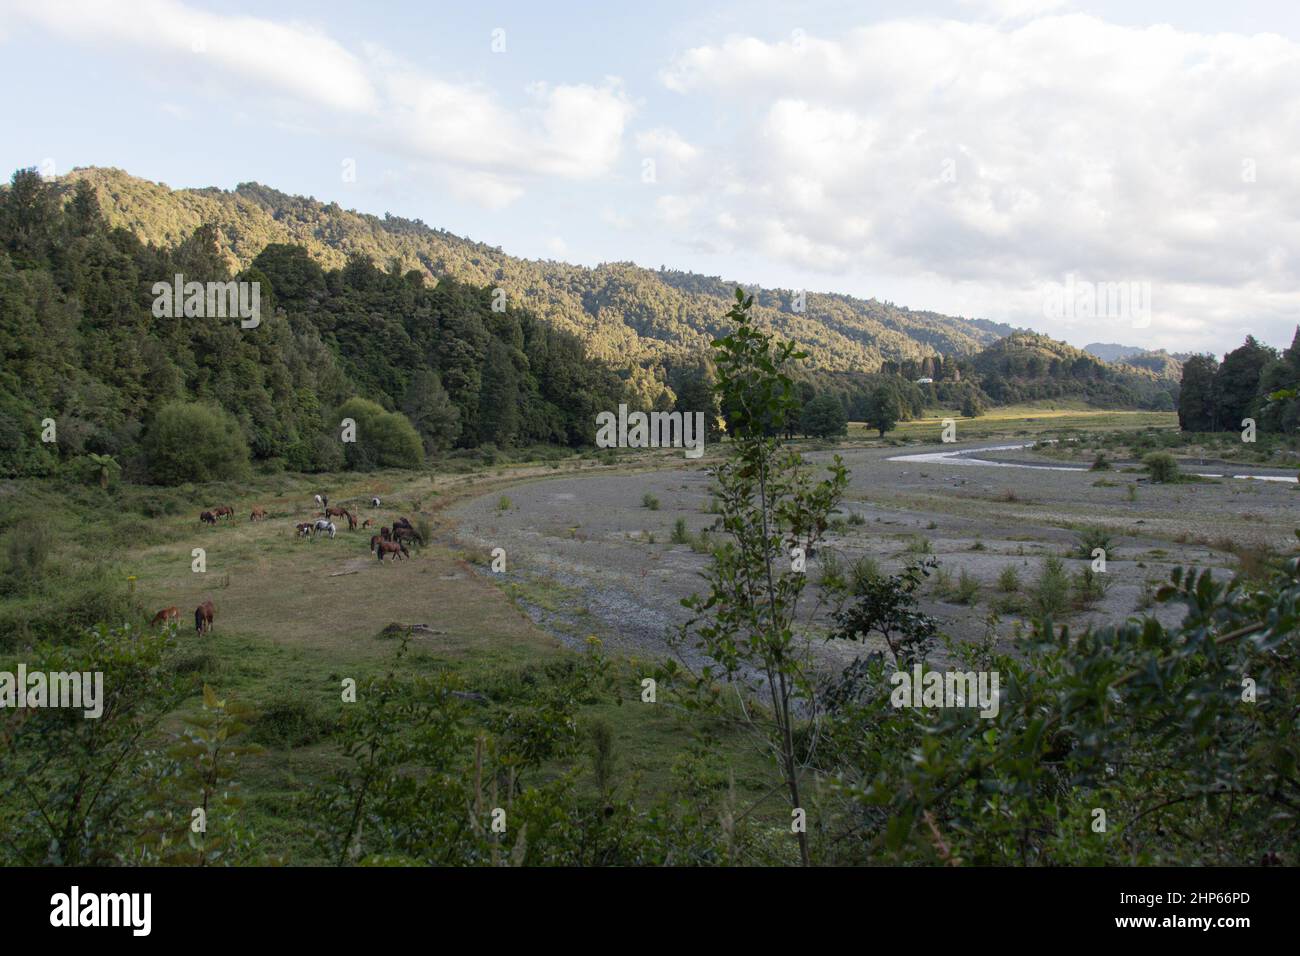 The view of picturesque landscape with Tauranga river in Matahi Valley, New Zealand. Stock Photo